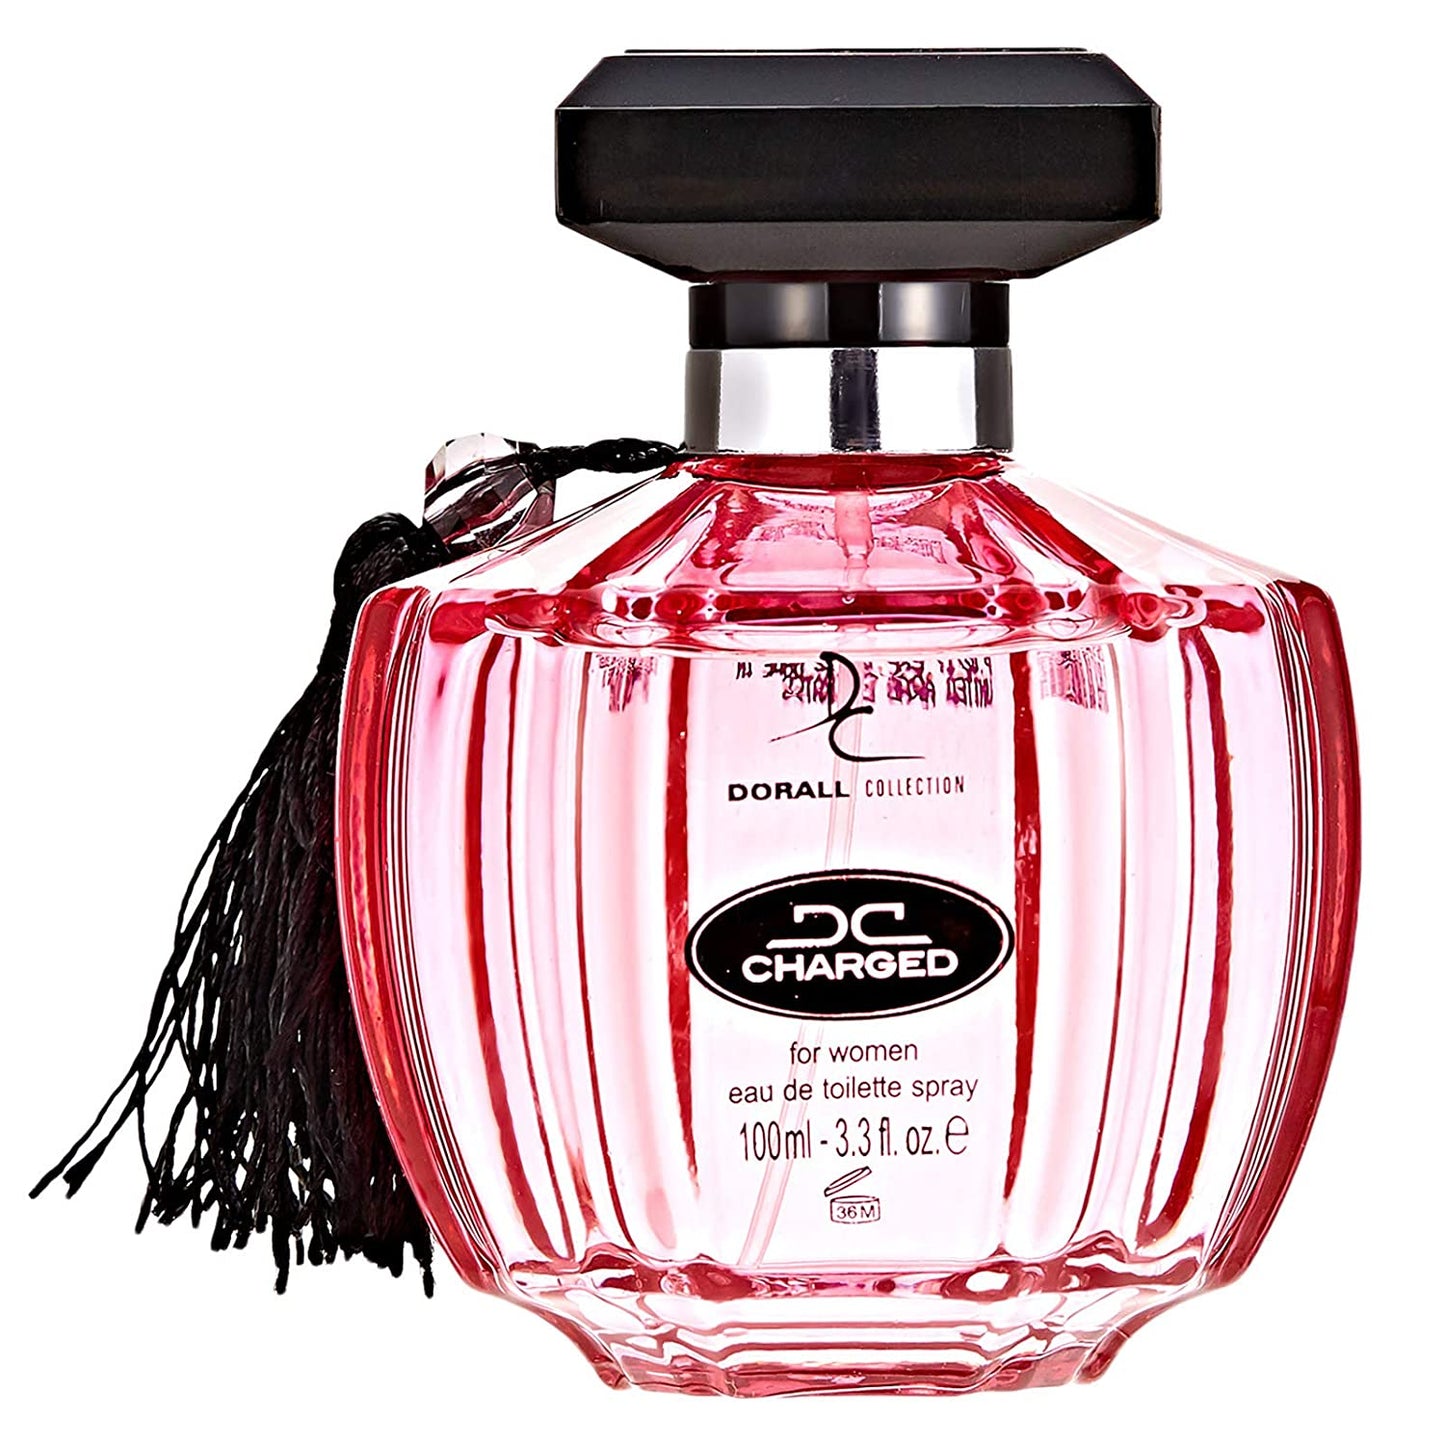 100 ml EDT DC CHARGED Fragancia floral afrutada para mujer